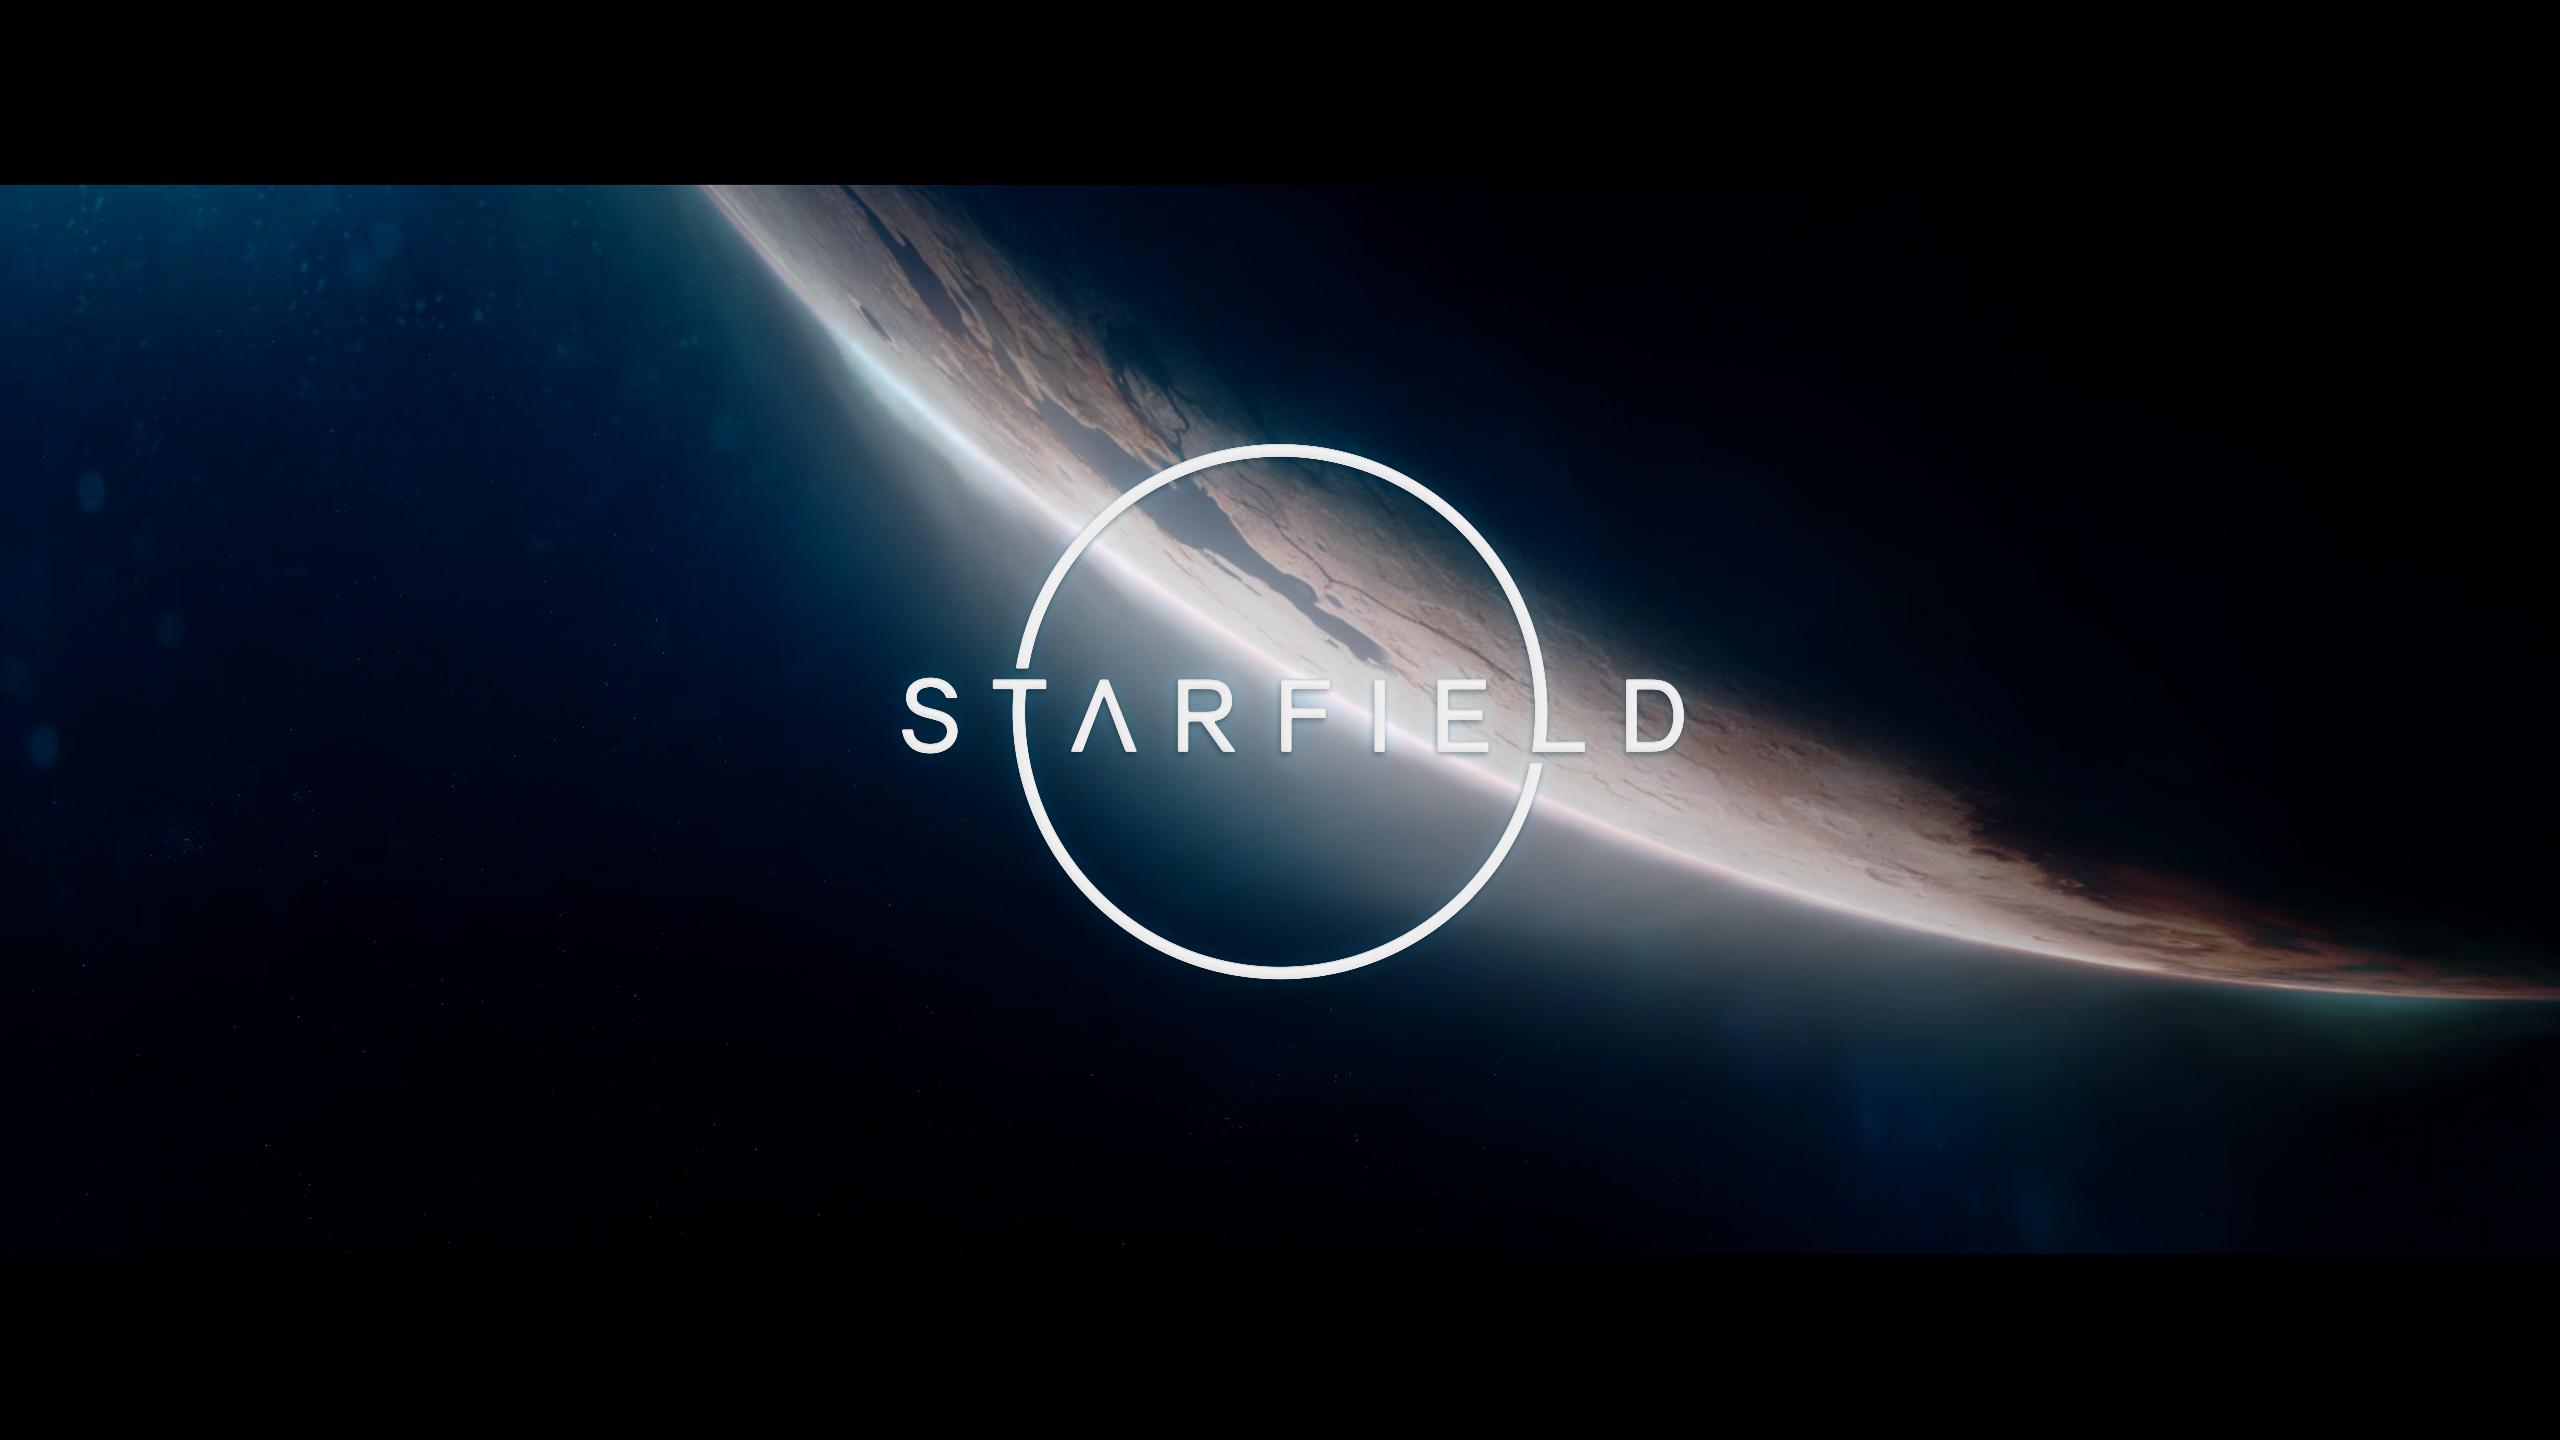 download the new version for windows Starfield